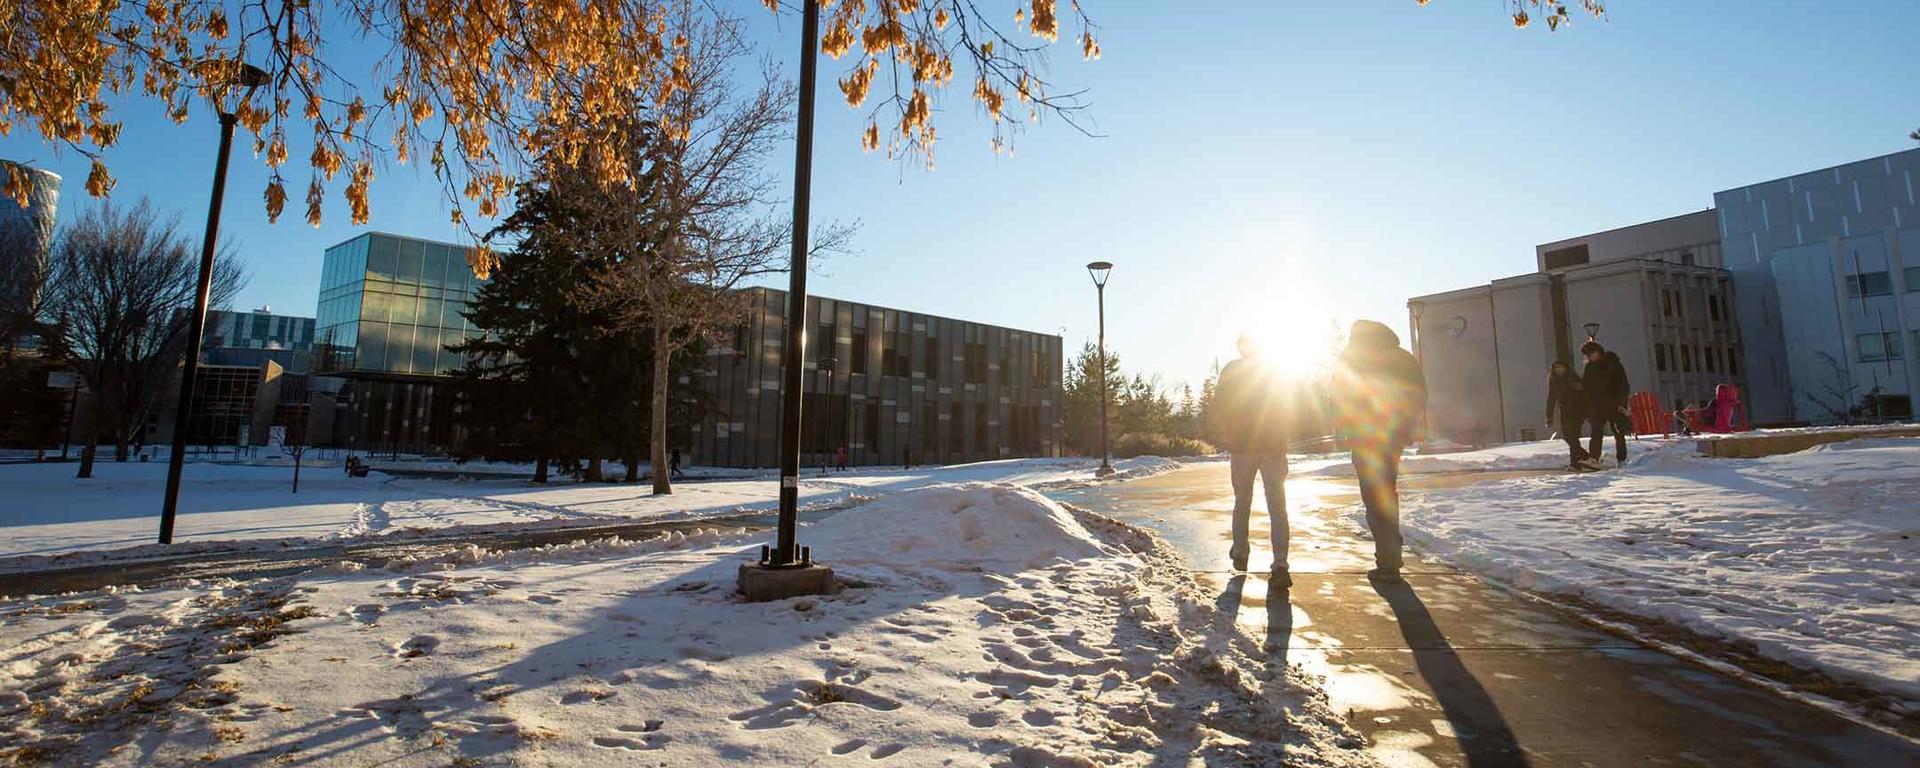 Students walk across a snow-covered campus